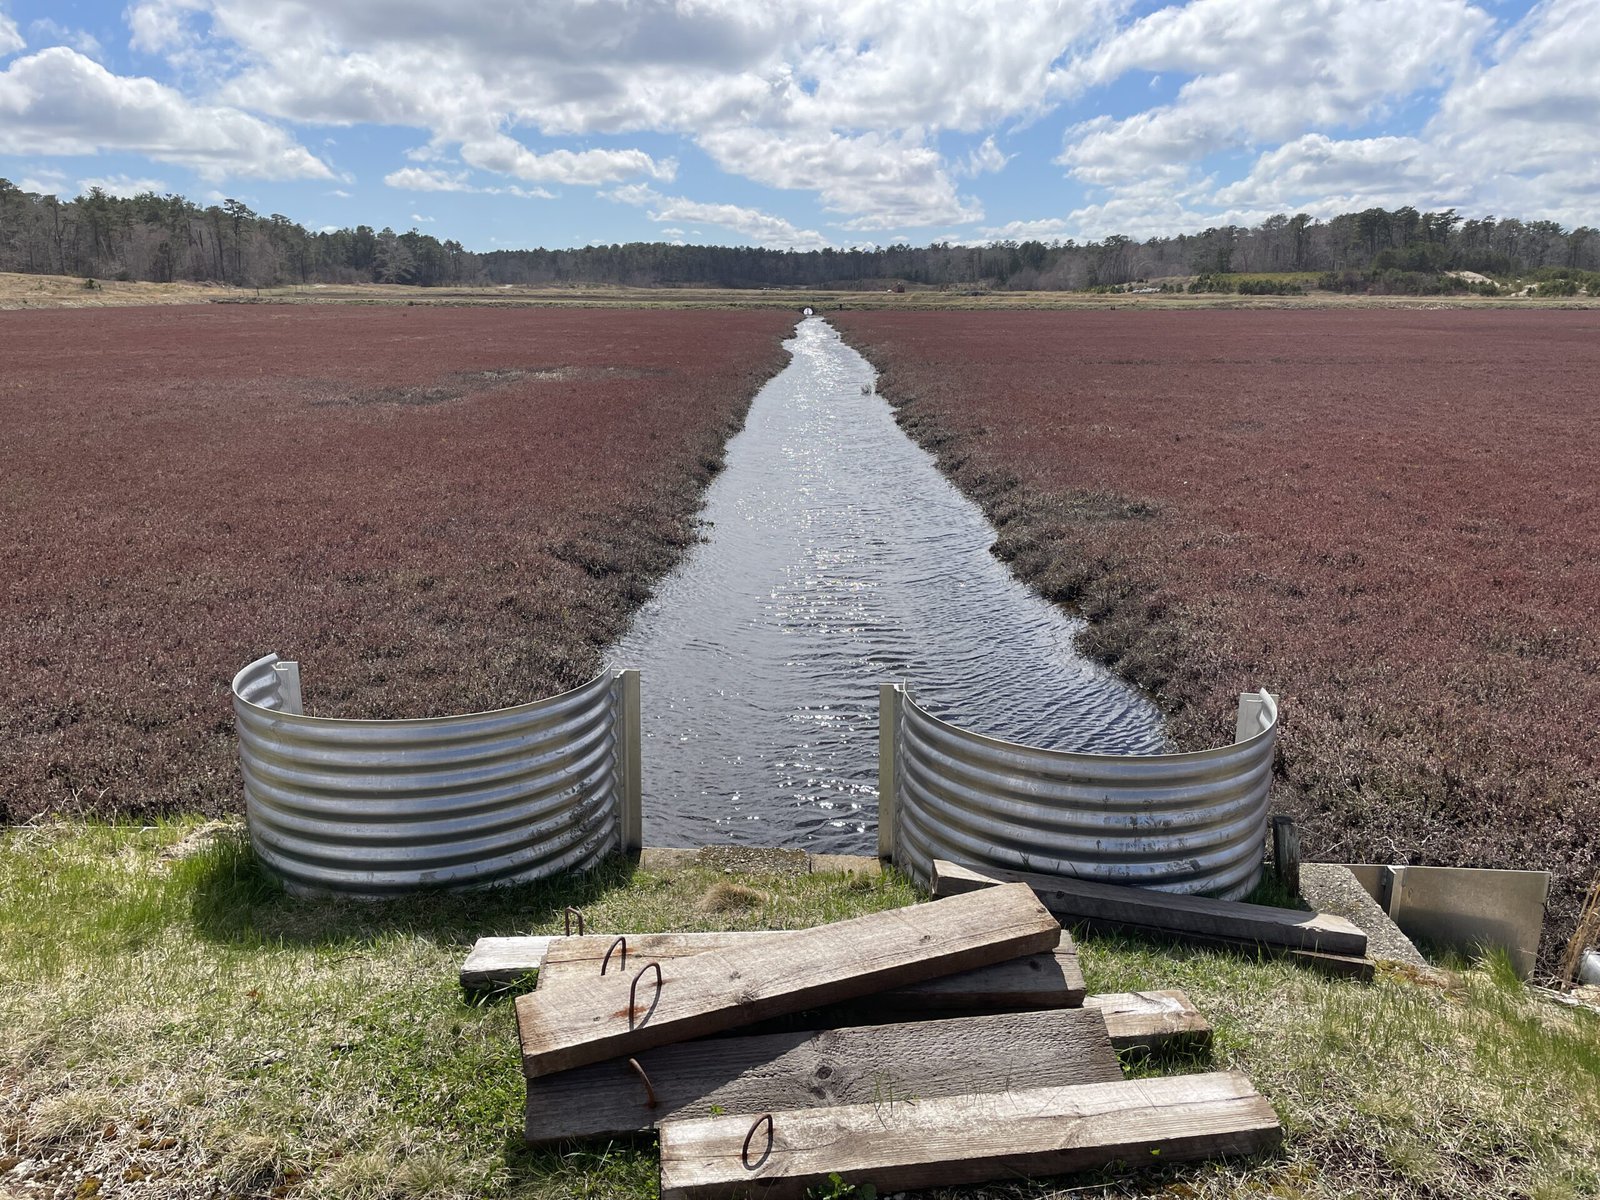 A large cranberry farm with water running through.